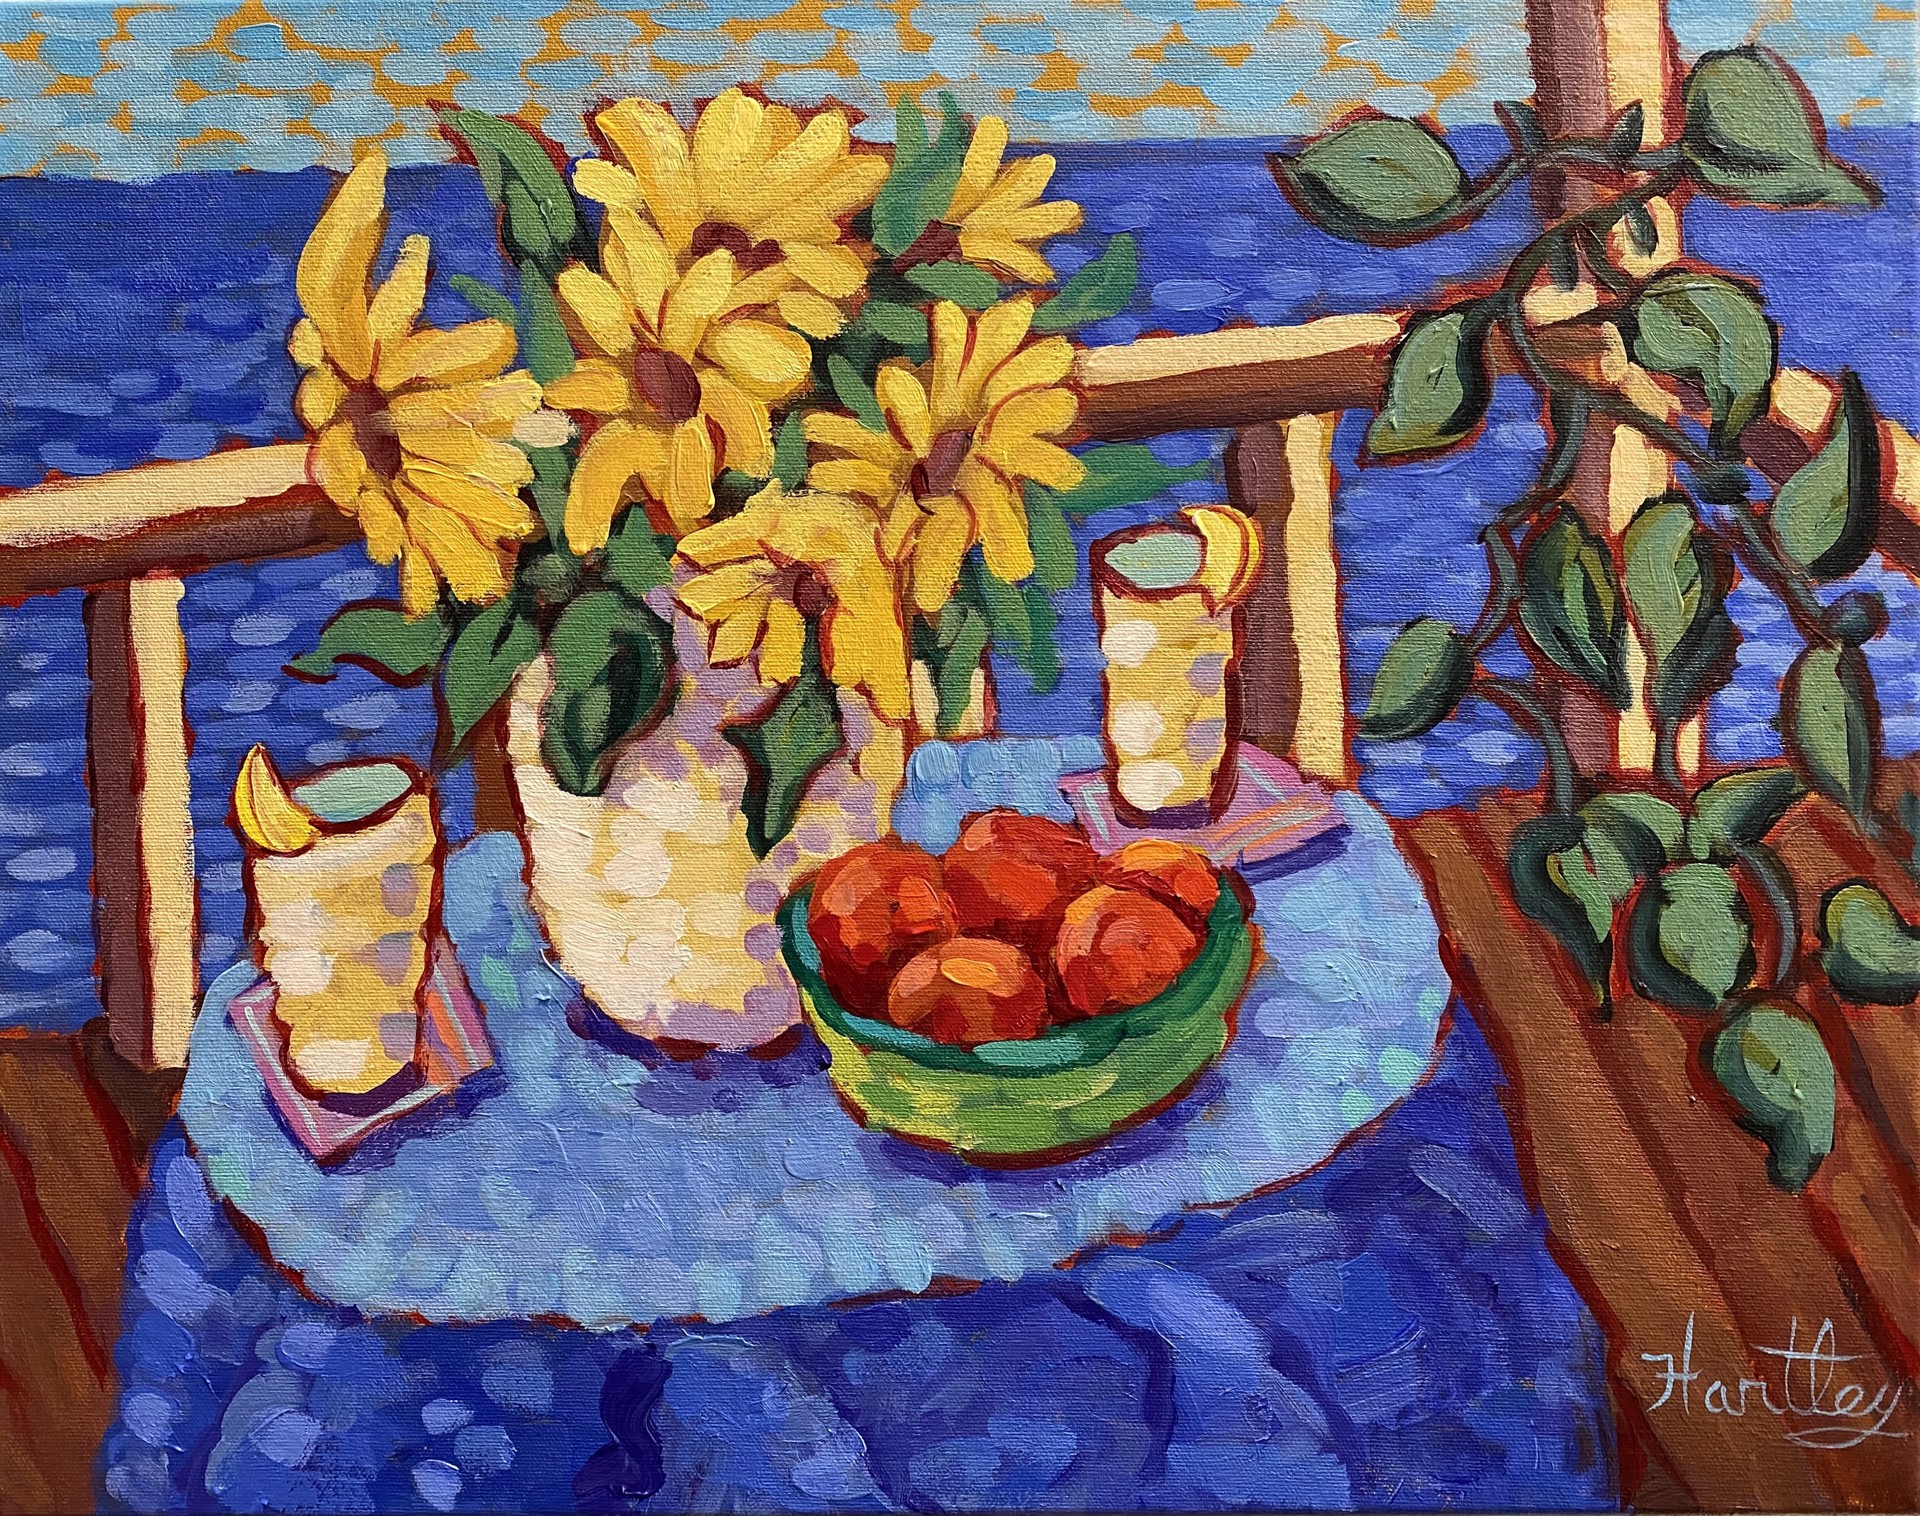 Lemonade by the Water by Claudia Hartley